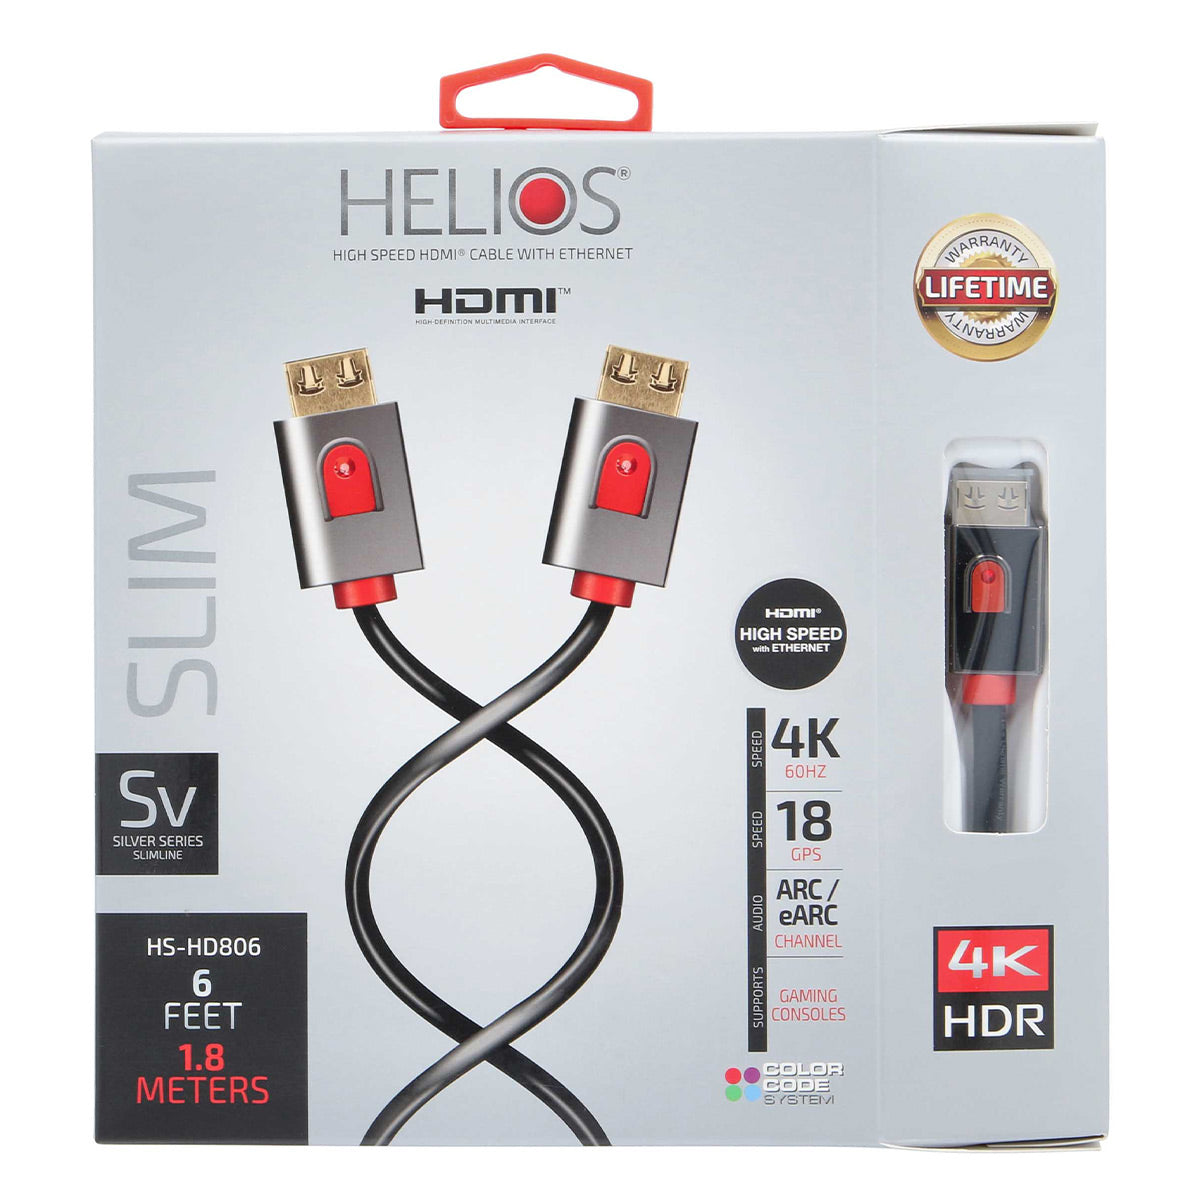 Helios Silver Series HDMI Cable - 6 ft.